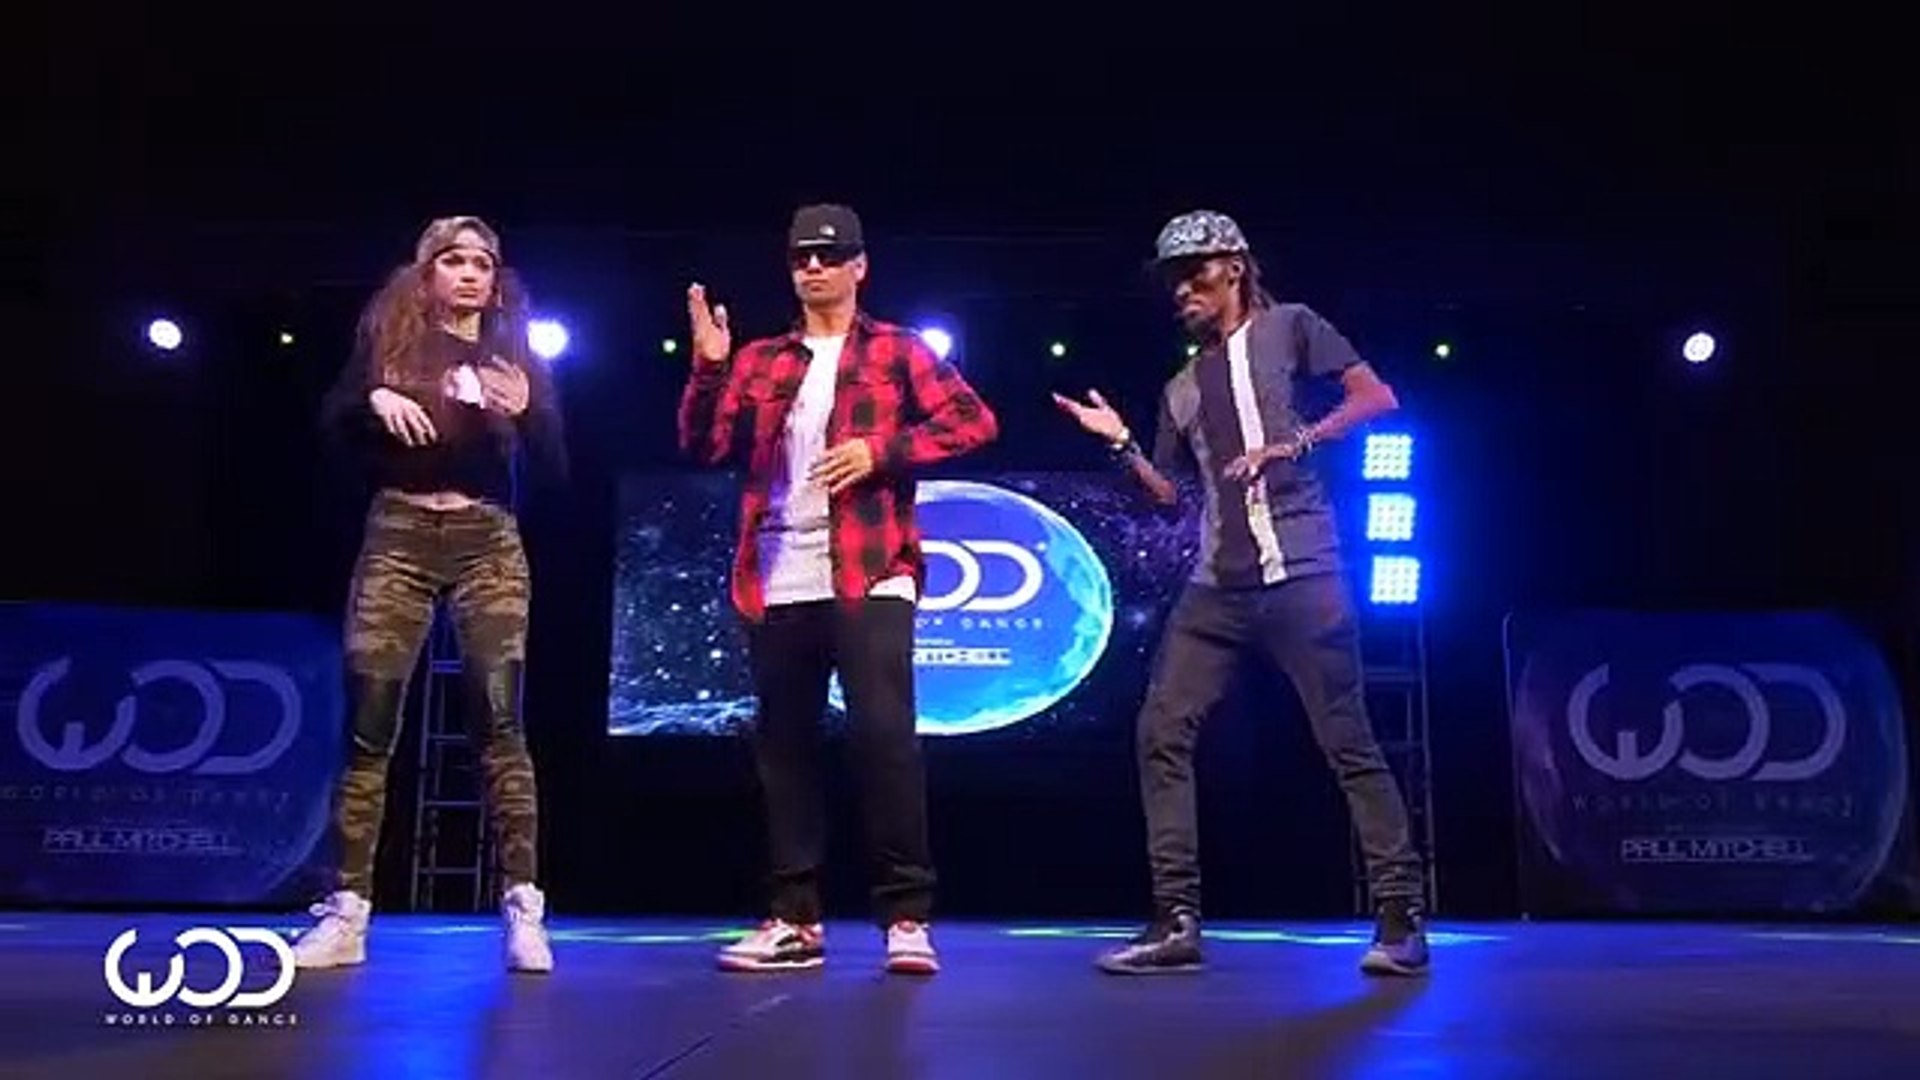 Best 3 Dancers in the world 2016 (HD) (Nonstop, Dytto, Poppin John) -  YouTube - video Dailymotion